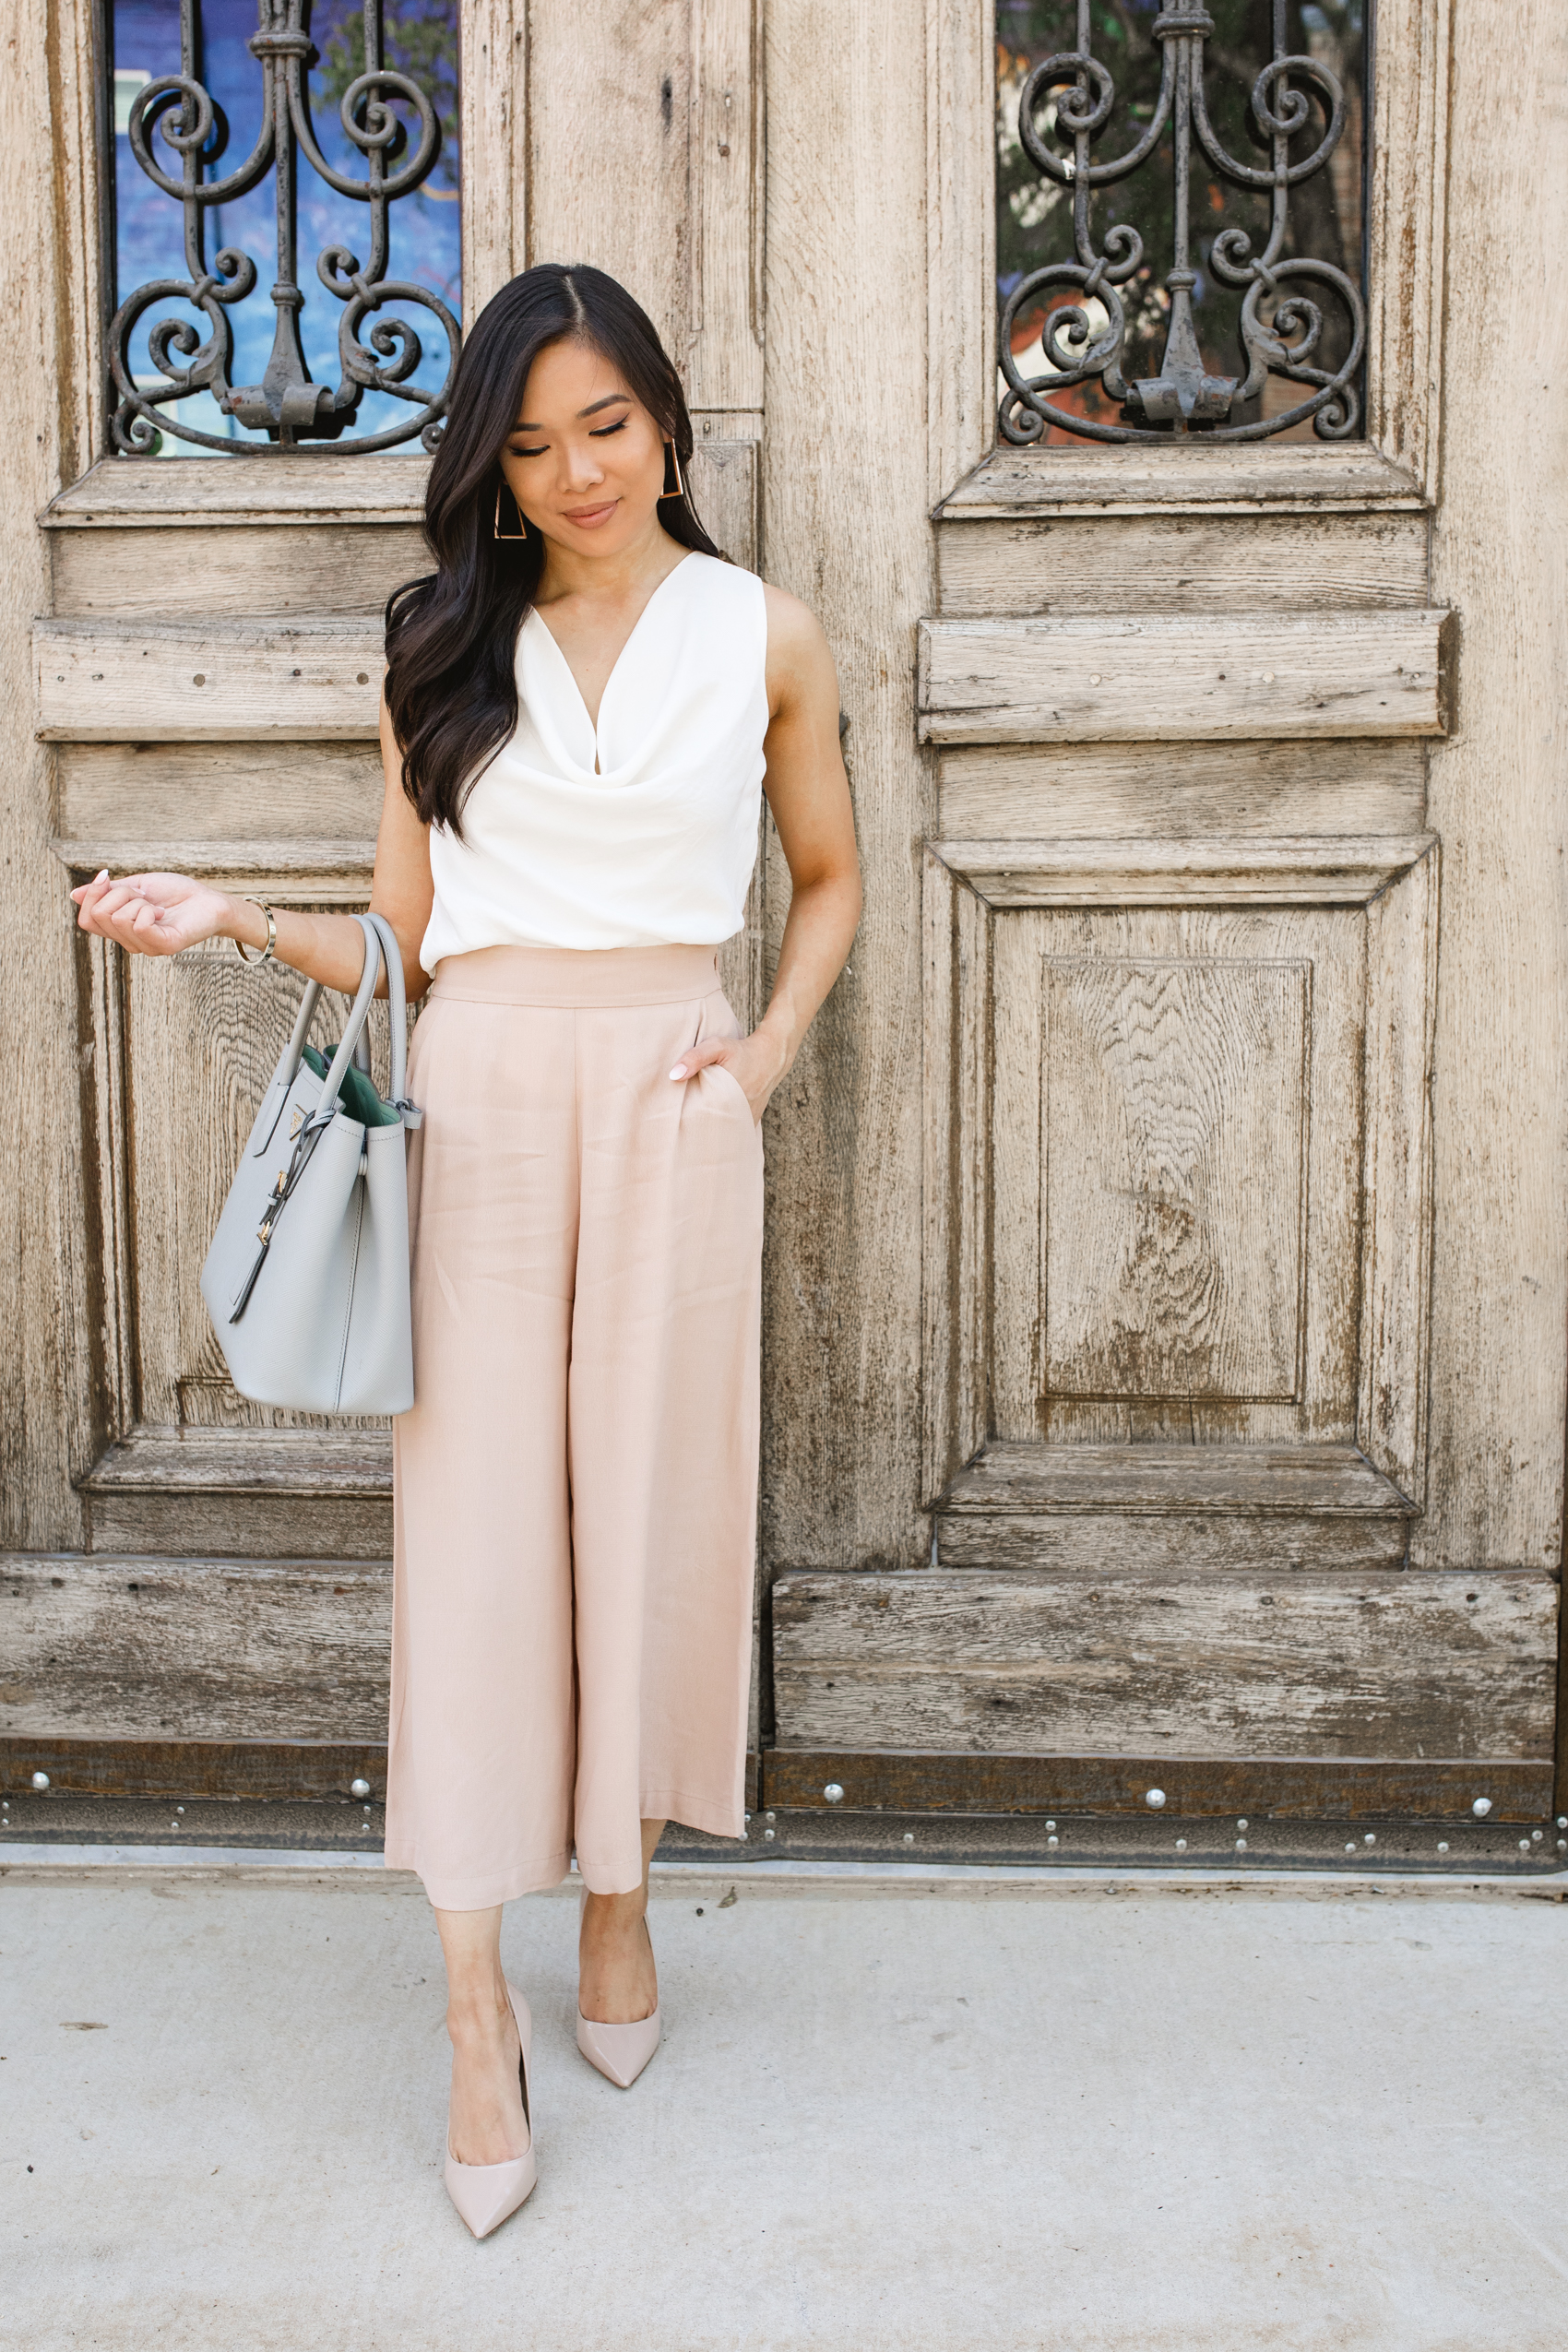 Workwear outfit inspo with nude wide-leg cropped pants, white blouse and nude heels